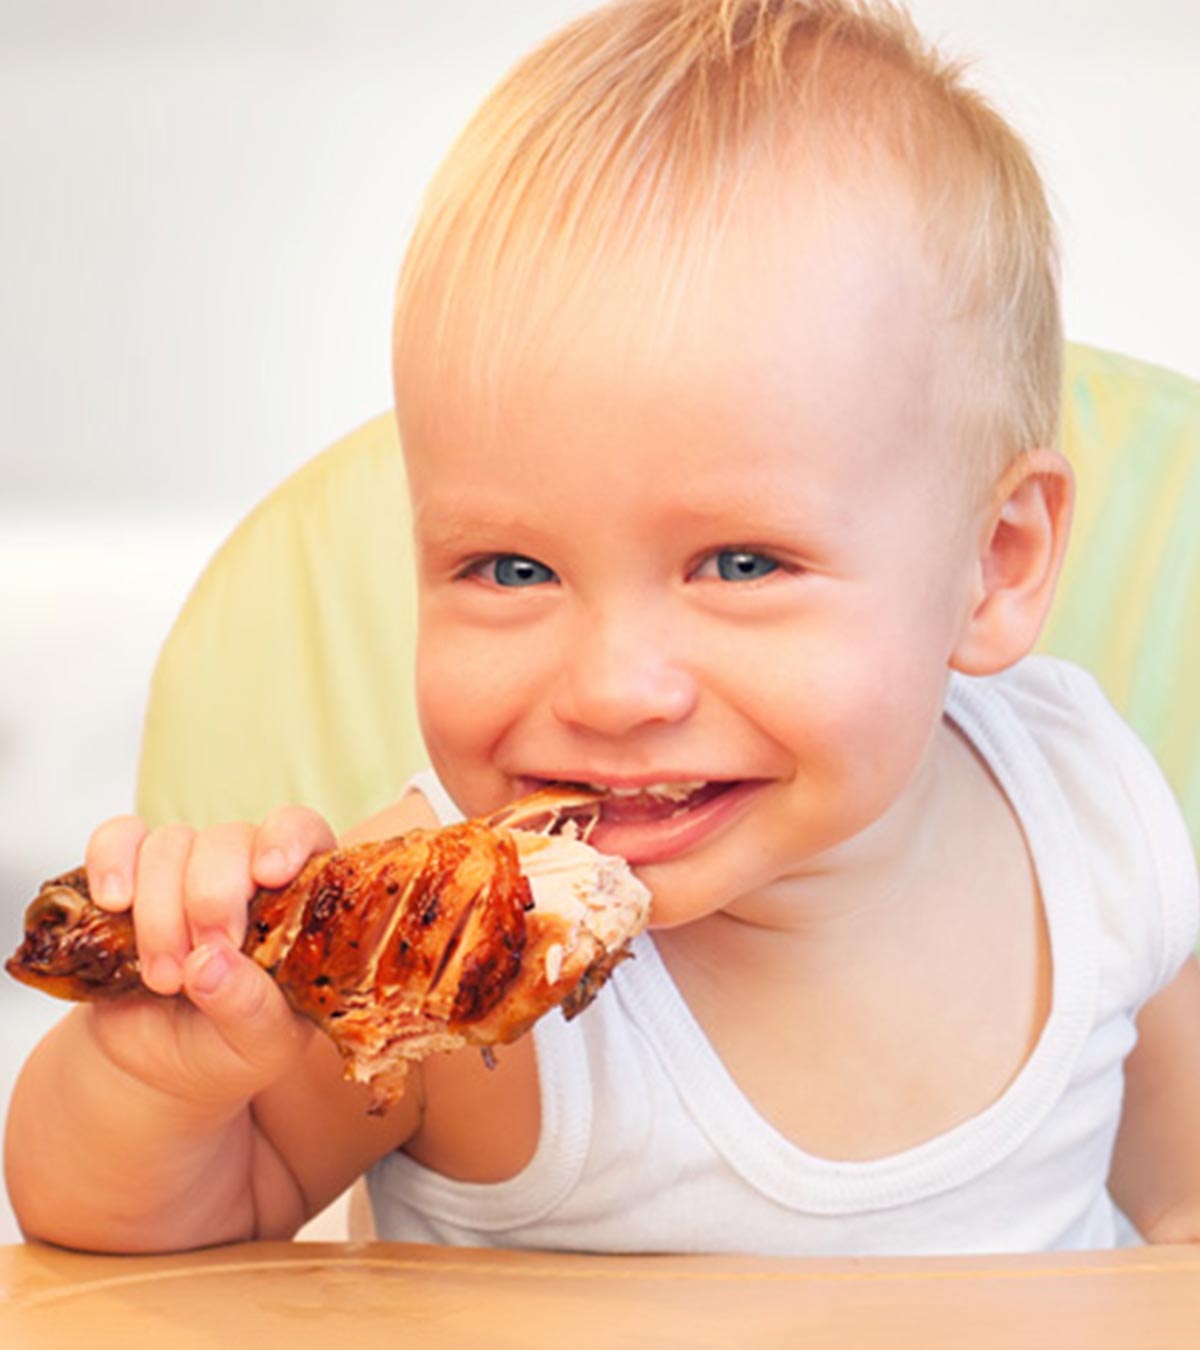 A baby eating chicken